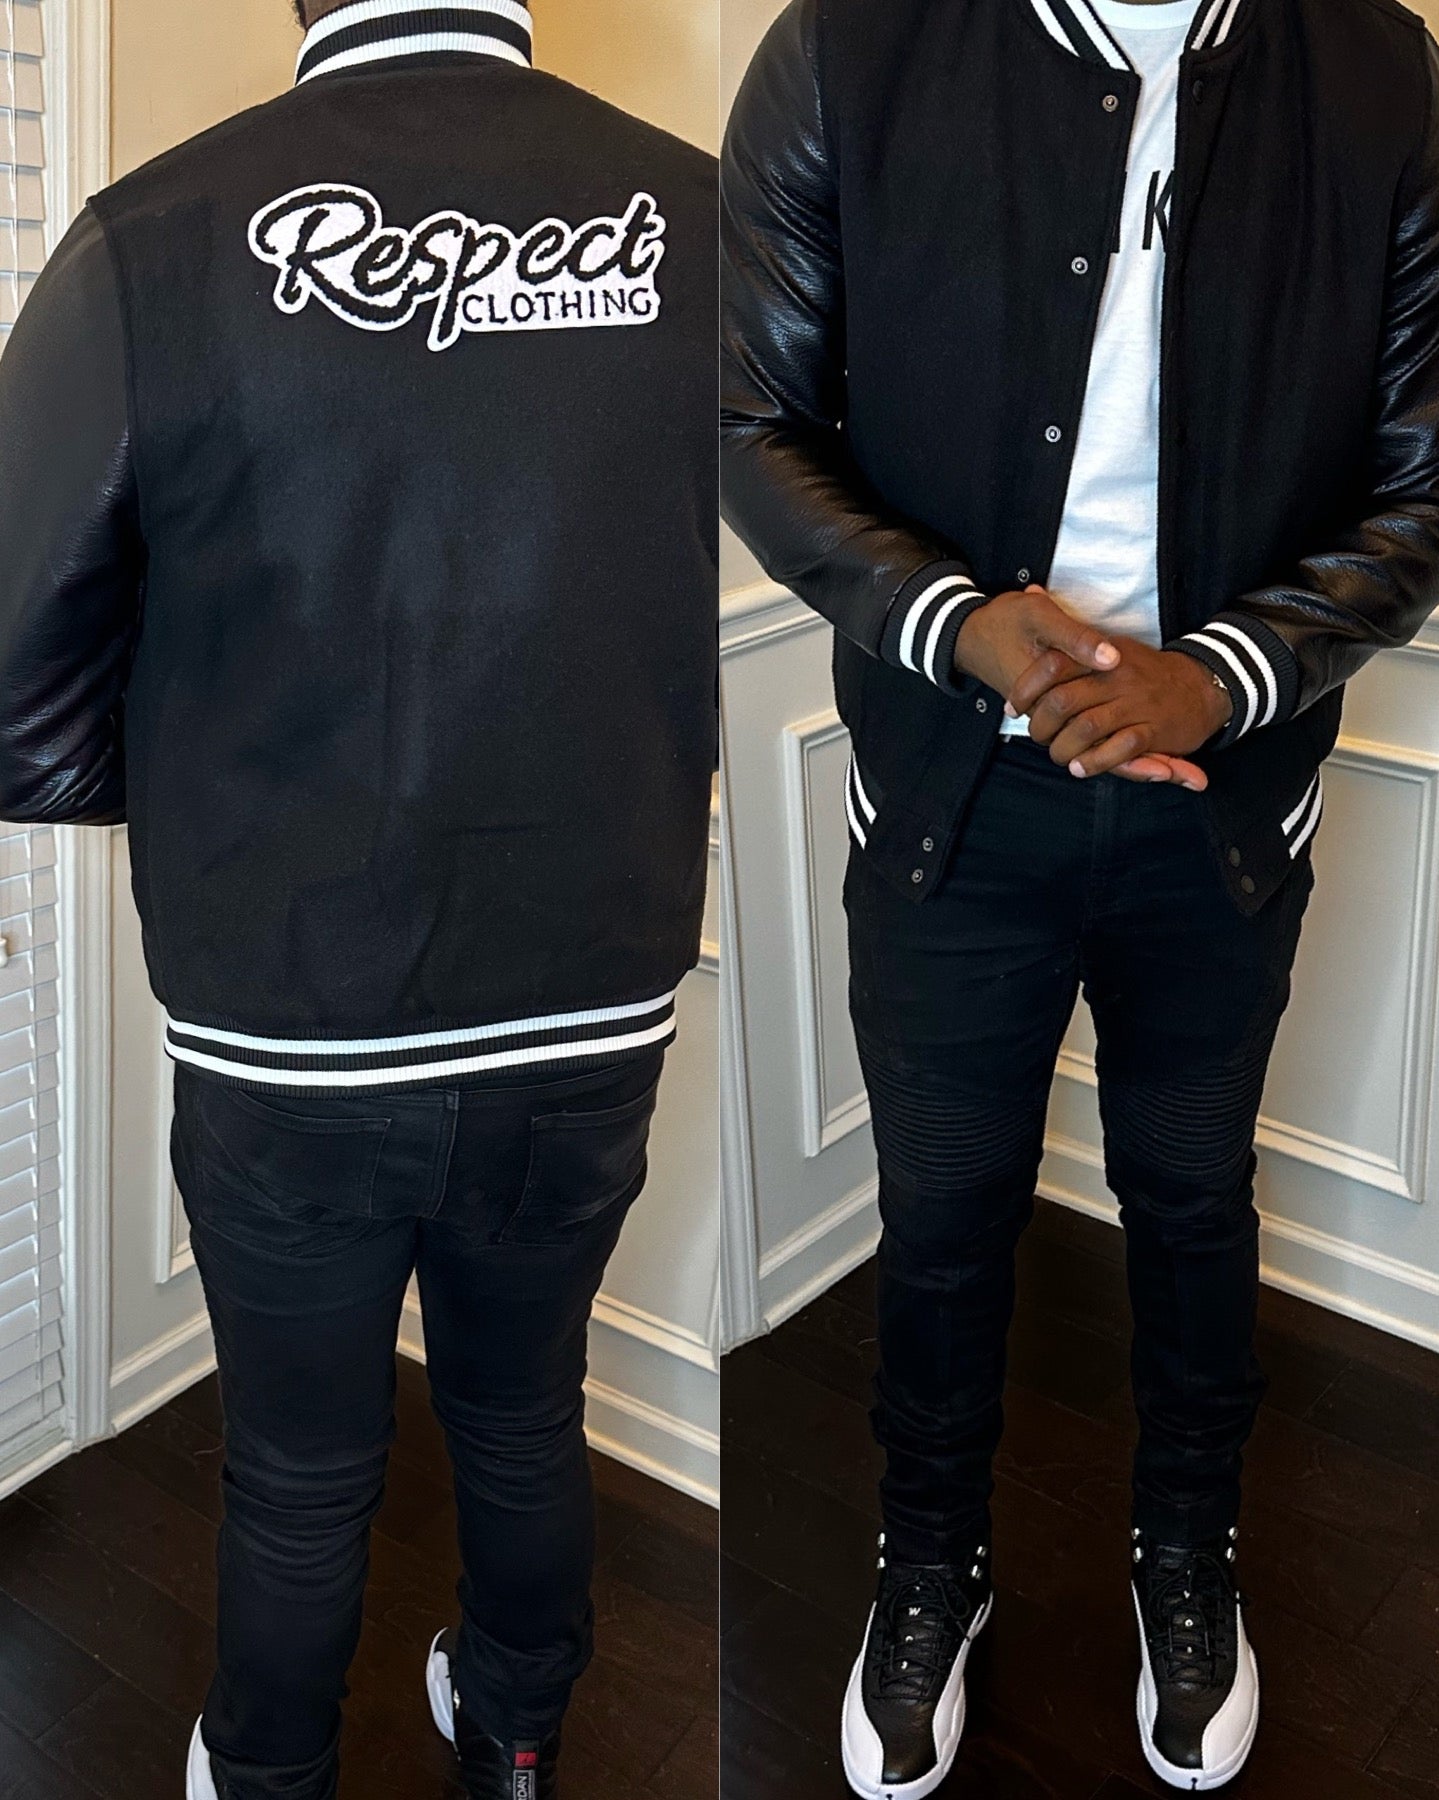 Respect Clothing Patch Bomber  Respect Clothing Patch Bomber jacket  Respect Bomber jacket  bomber jacket  Ladies Bomber Jacket  black Bomber jacket  jean jacket